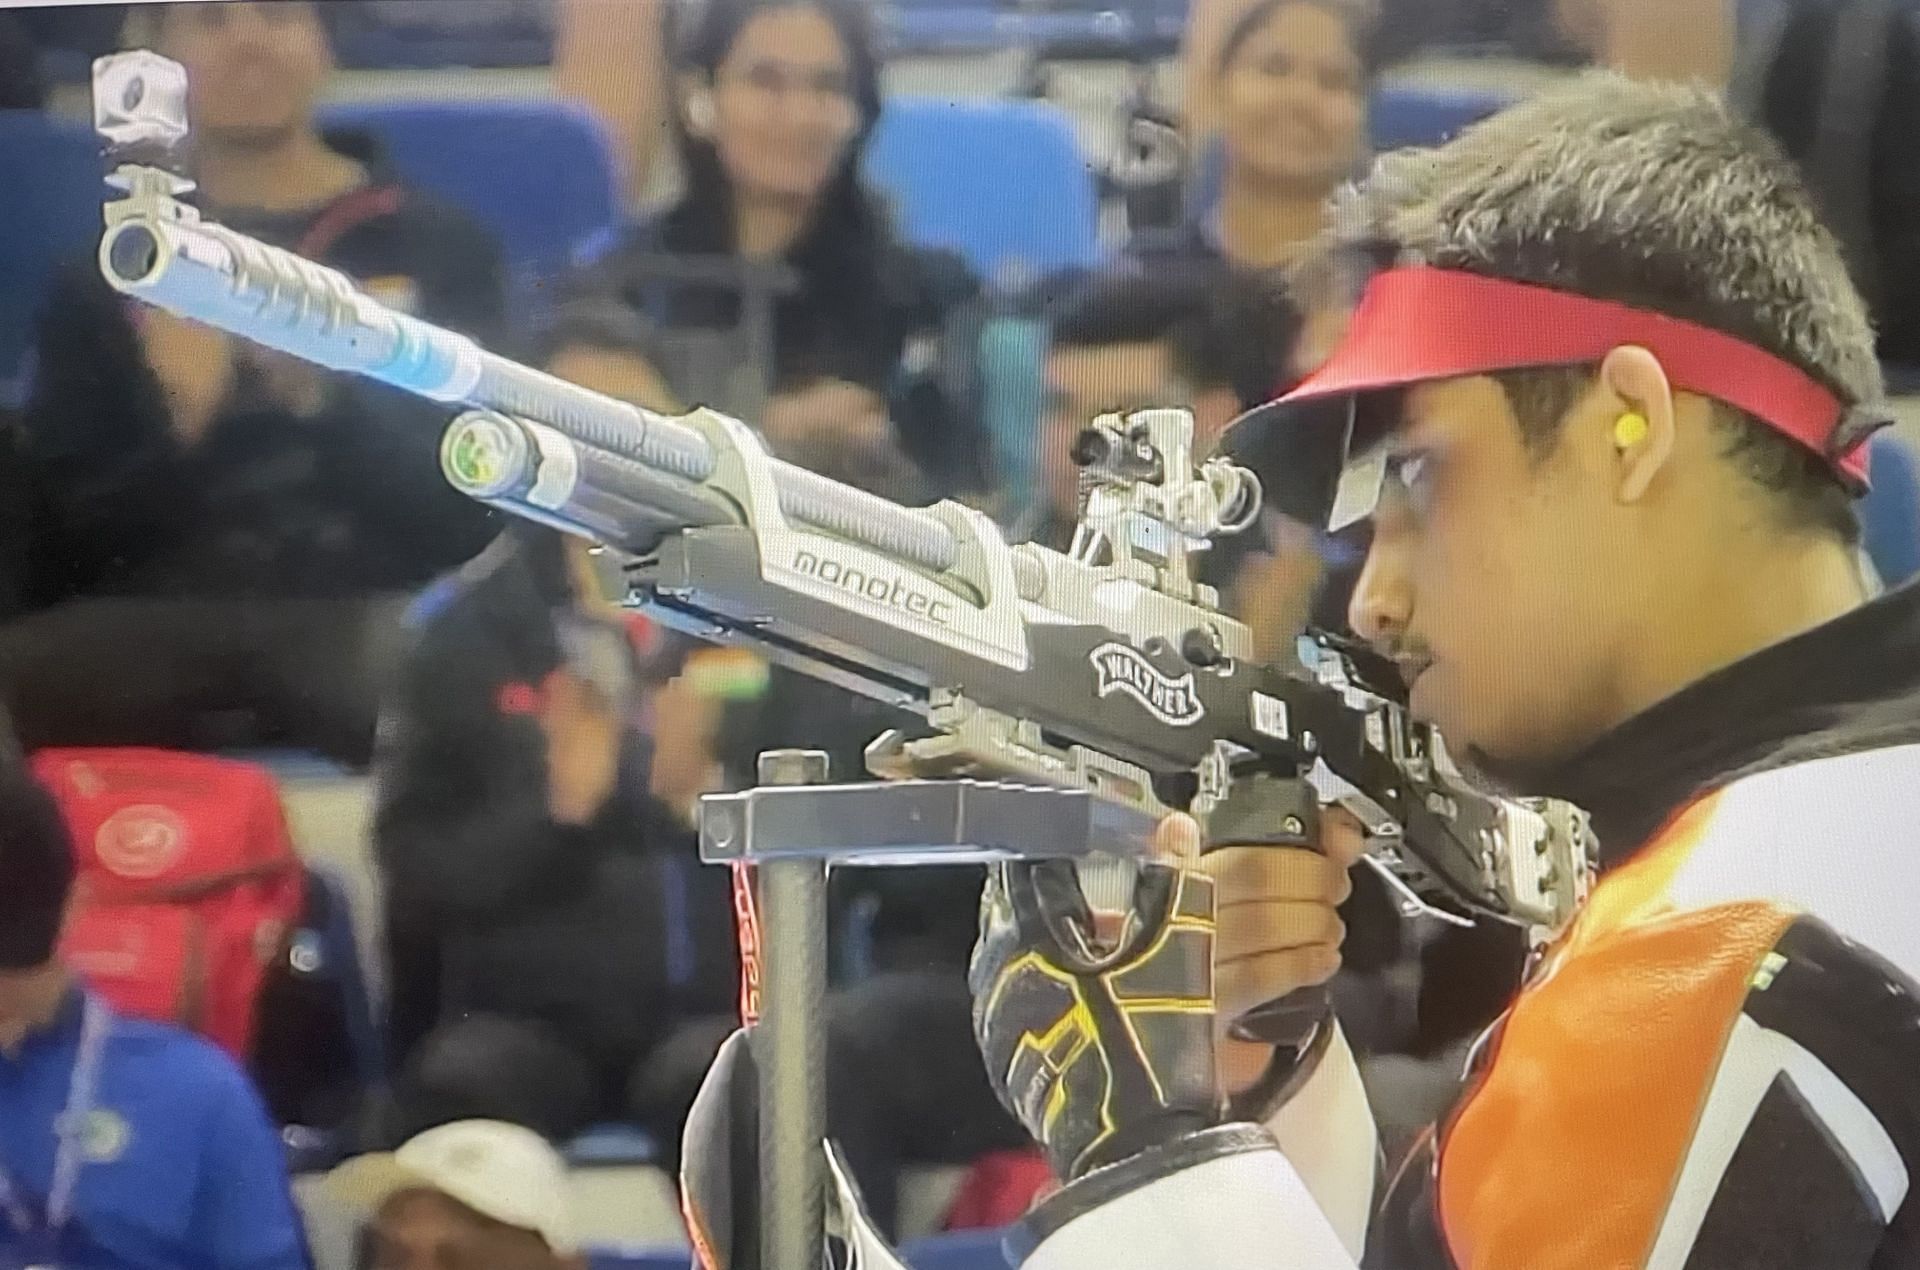 India&rsquo;s teenage 10m air rifle shooter Rudrankksh Balasaheb Patel in action on his way to winning gold medal at ISSF World Shooting Championship in Egypt. Photo credit ISSF.